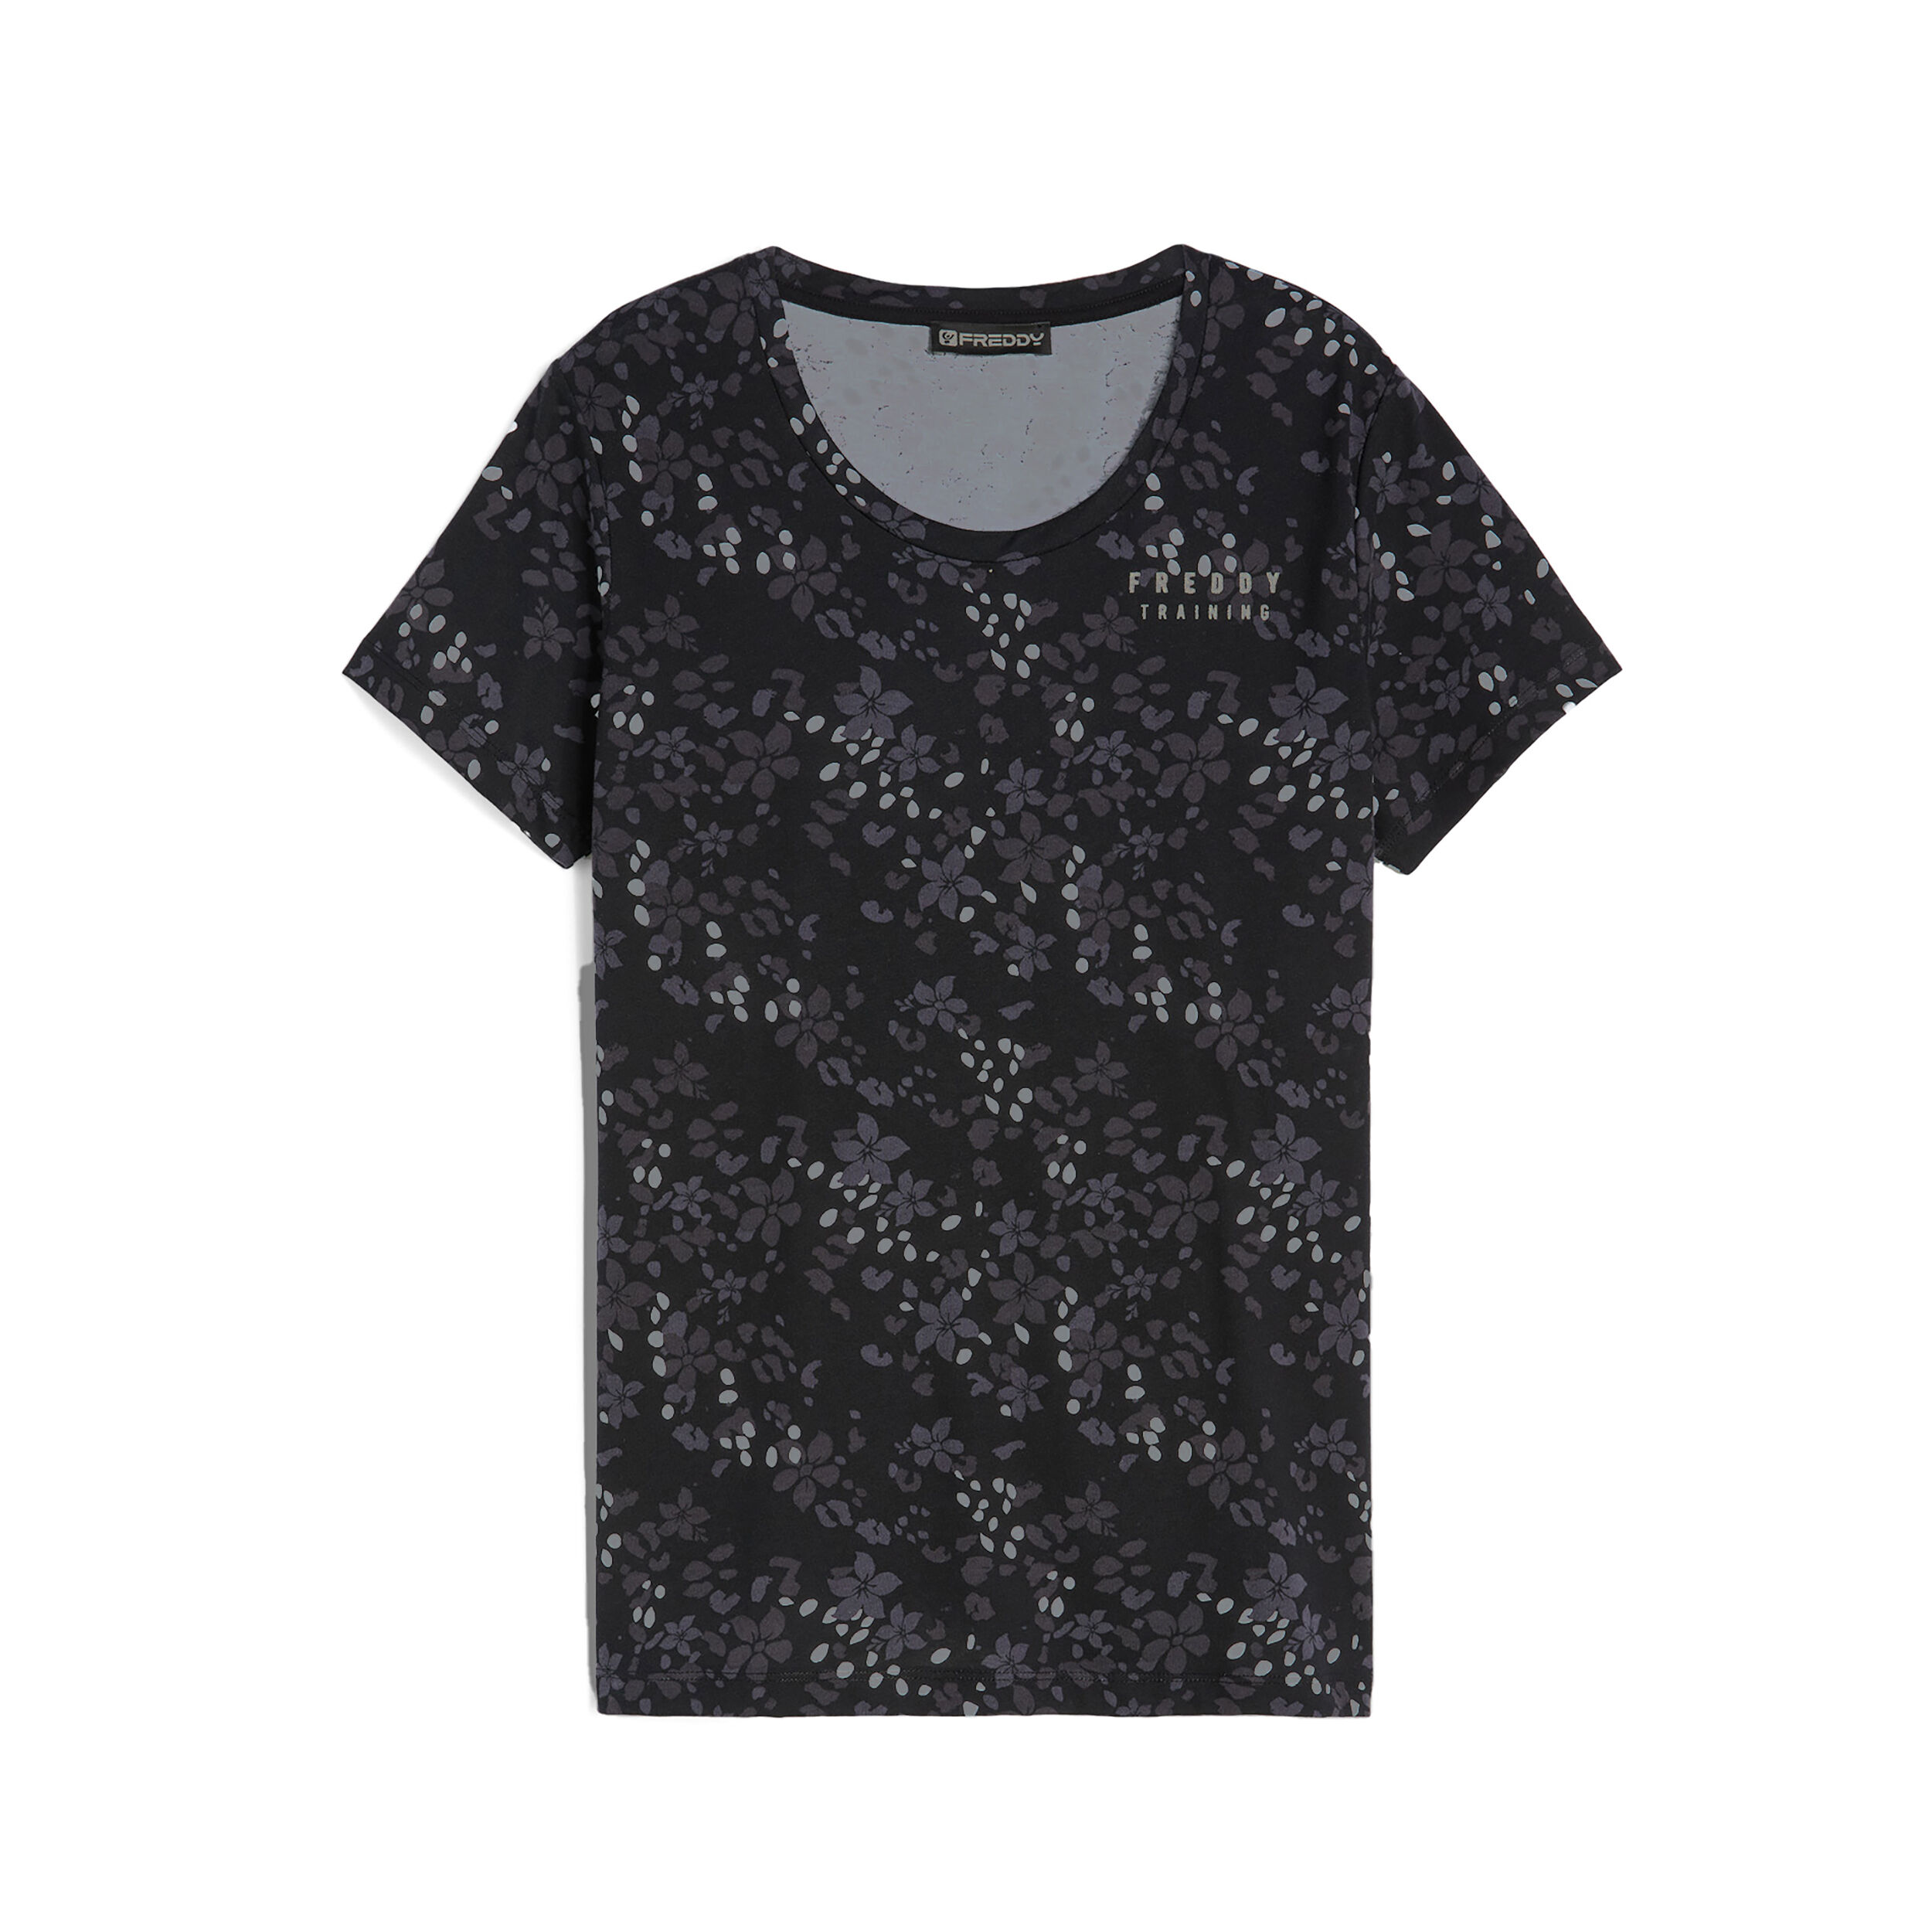 Freddy T-shirt comfort in jersey leggero stampa floreale allover Black Animal-Flower Allover Donna Extra Large